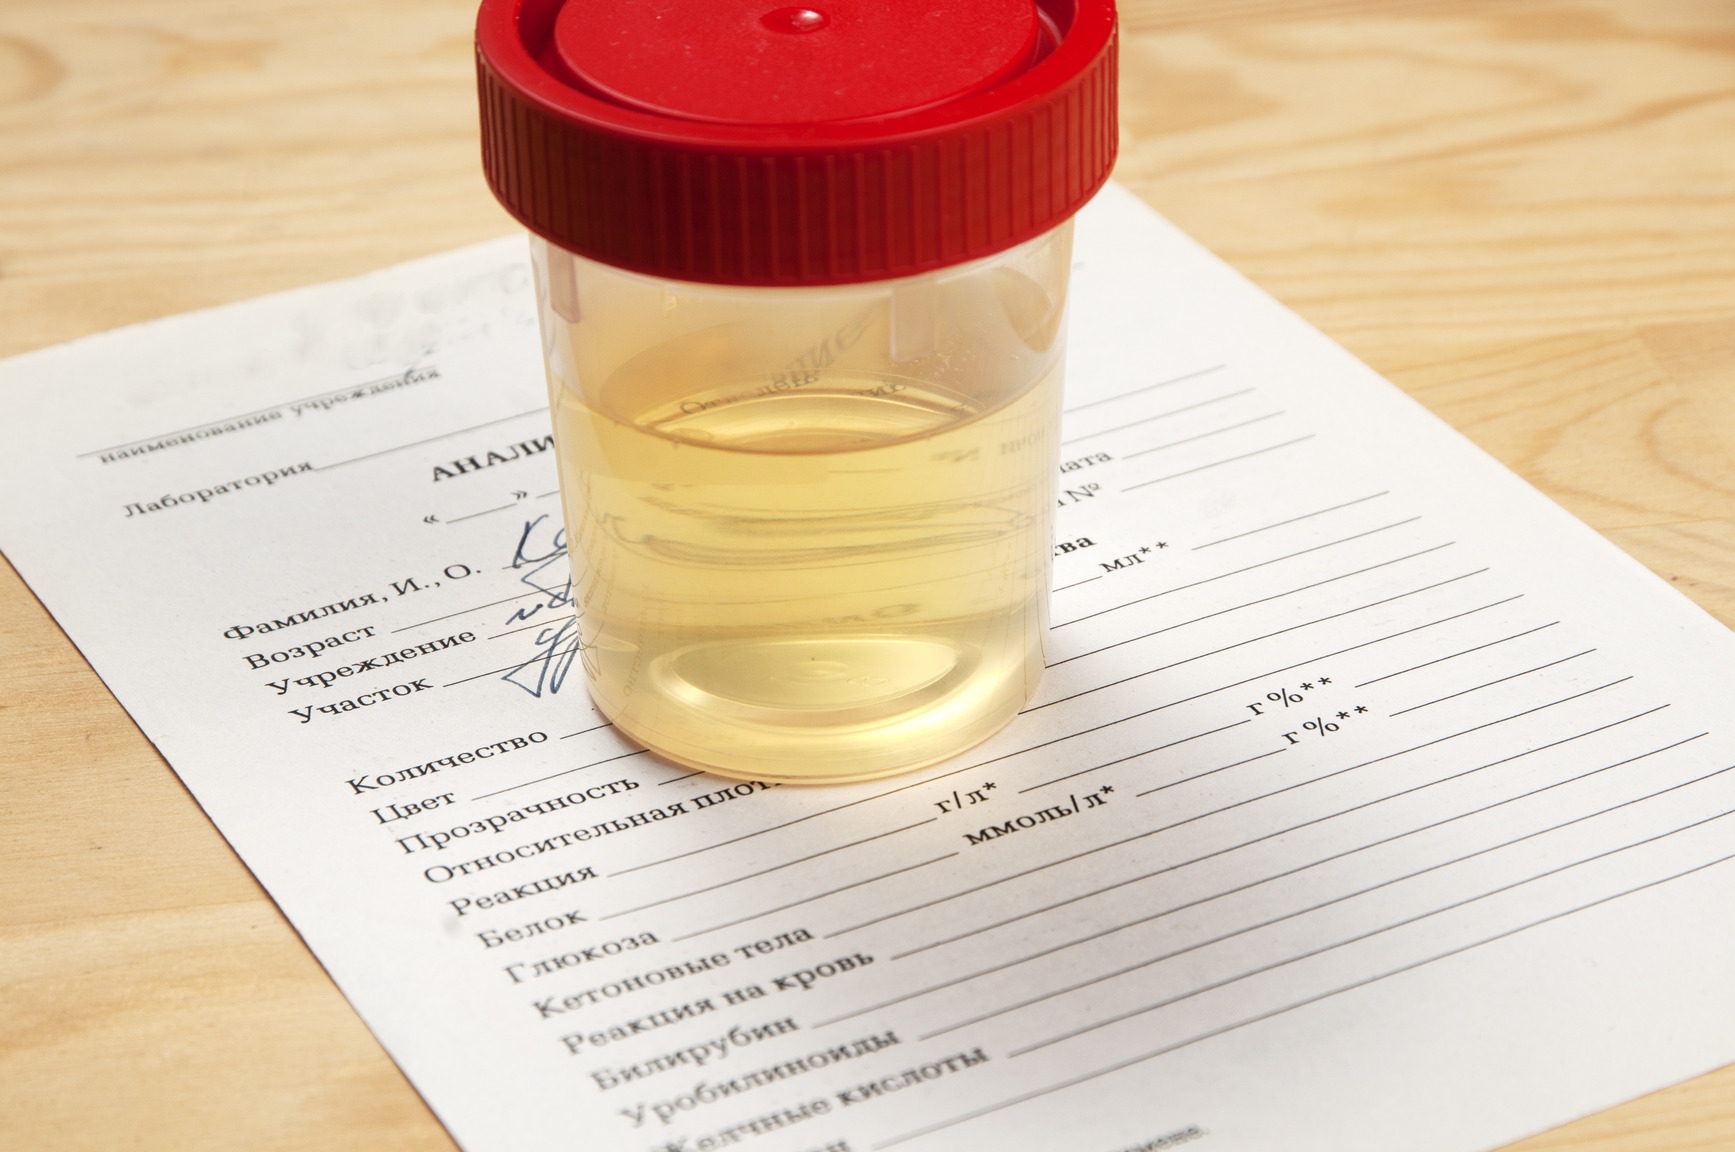 Medical examination of urine in a plastic glass